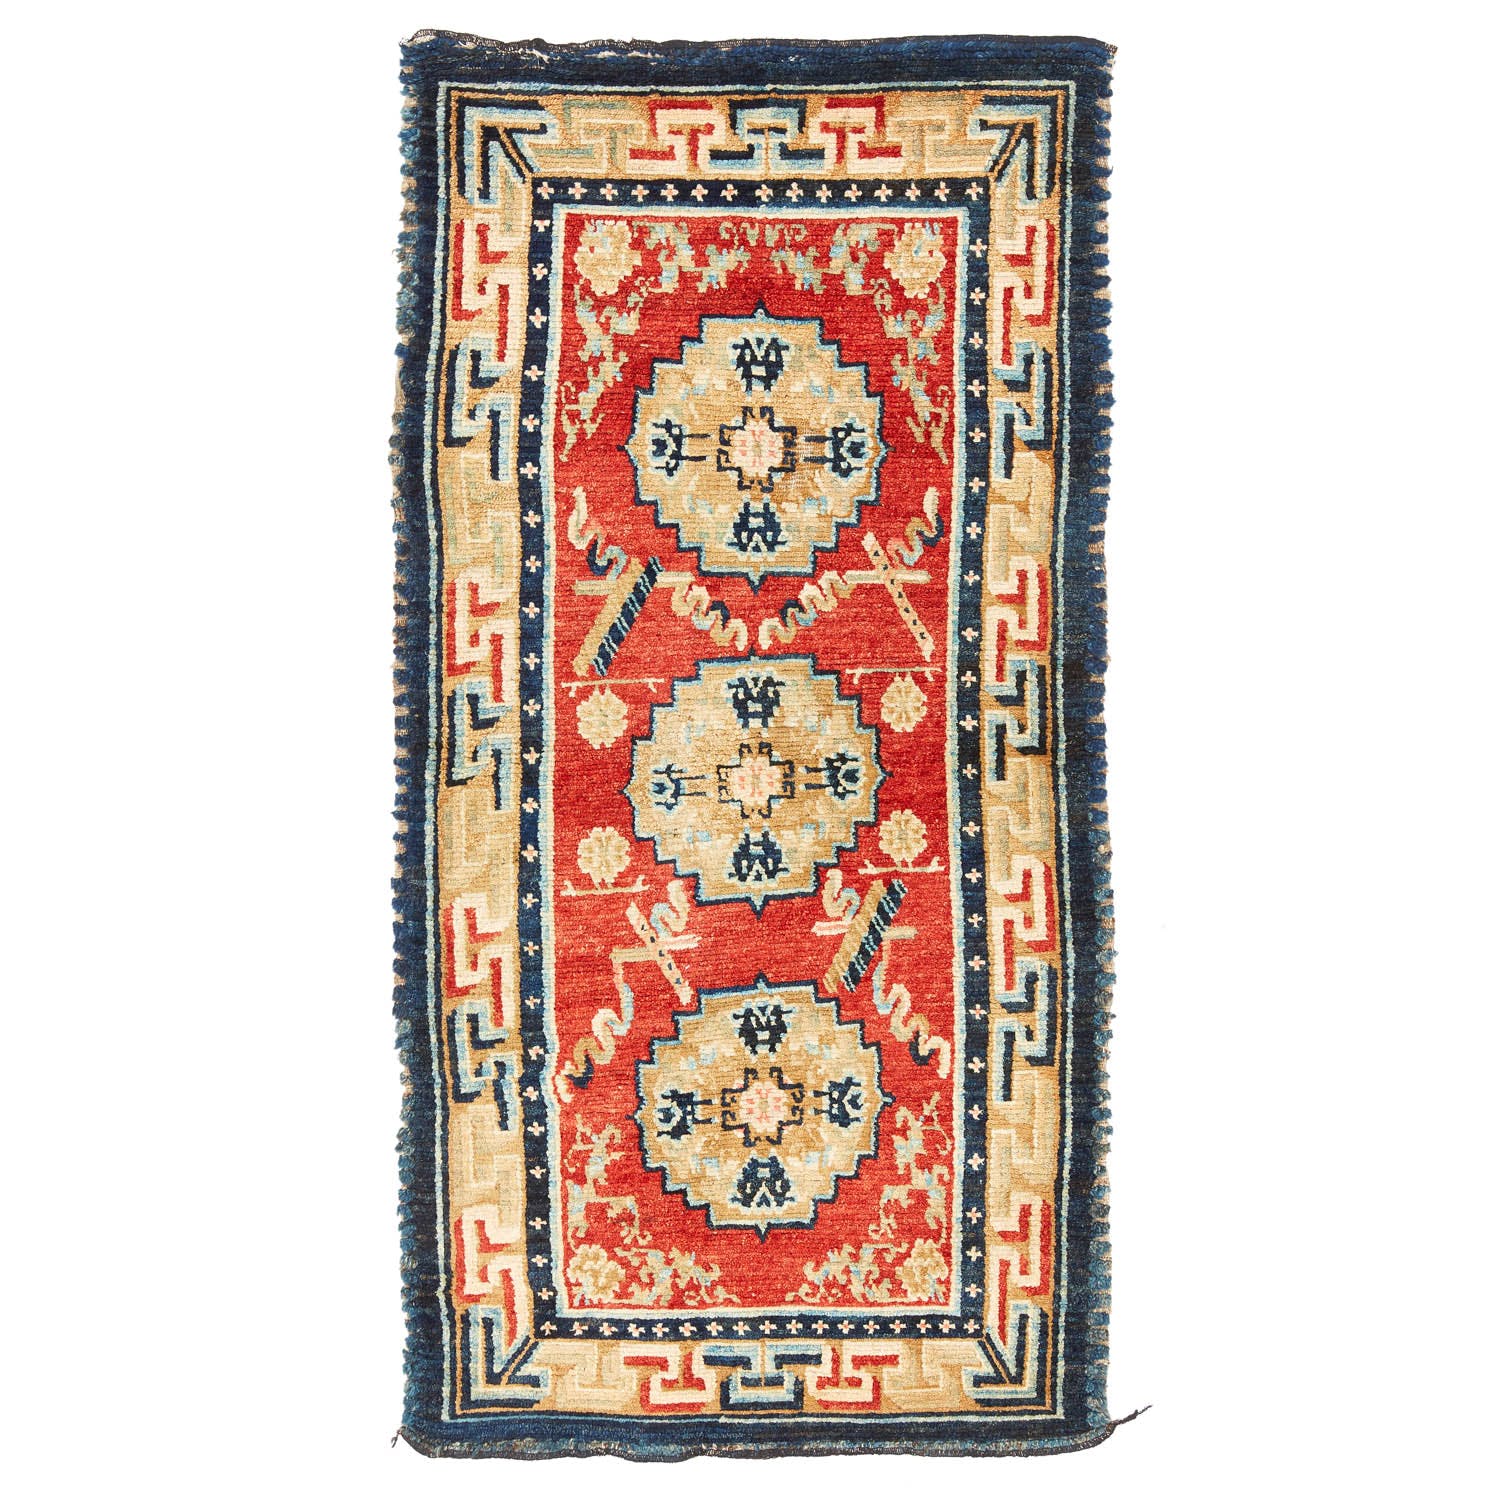 Hand-knotted antique rug with red diamond medallions and intricate borders.